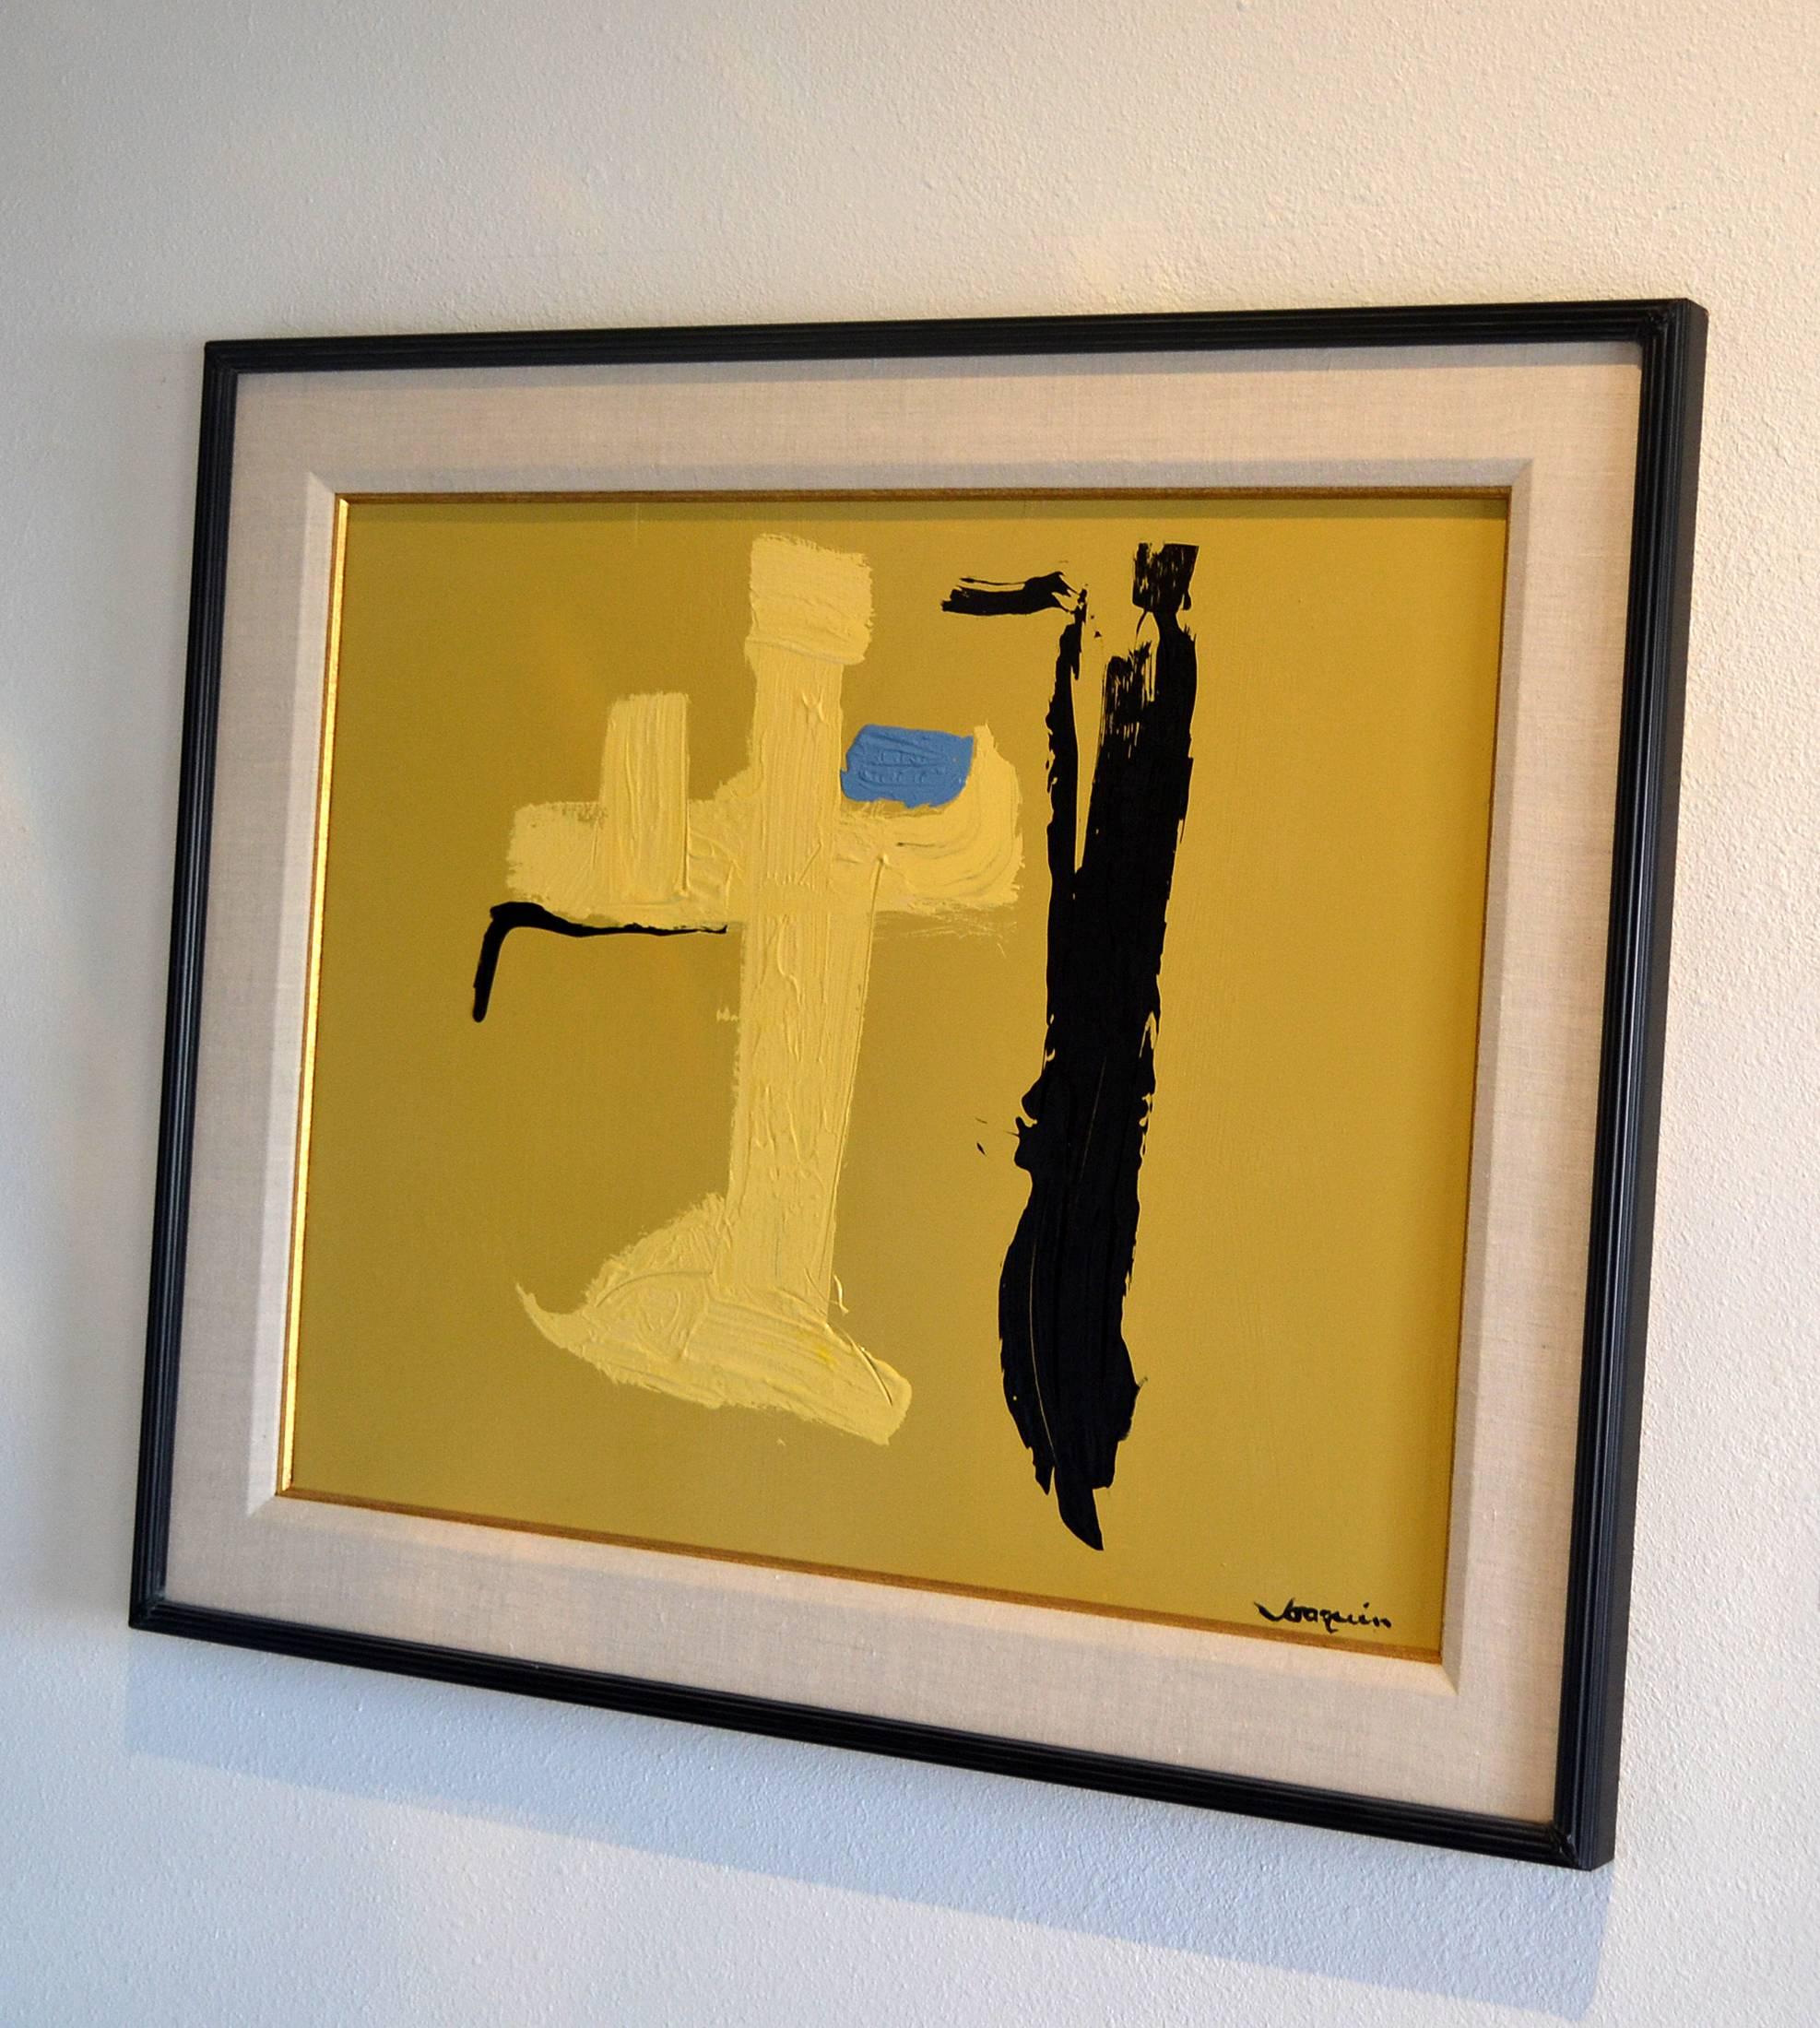 A brilliantly executed abstract painting by listed artist Kenneth Joaquin (b. 1948) titled Touch Of Blue. Executed in acrylic on board, signed lower right. Framed in black molding with ivory linen liner. This painting is currently part of a